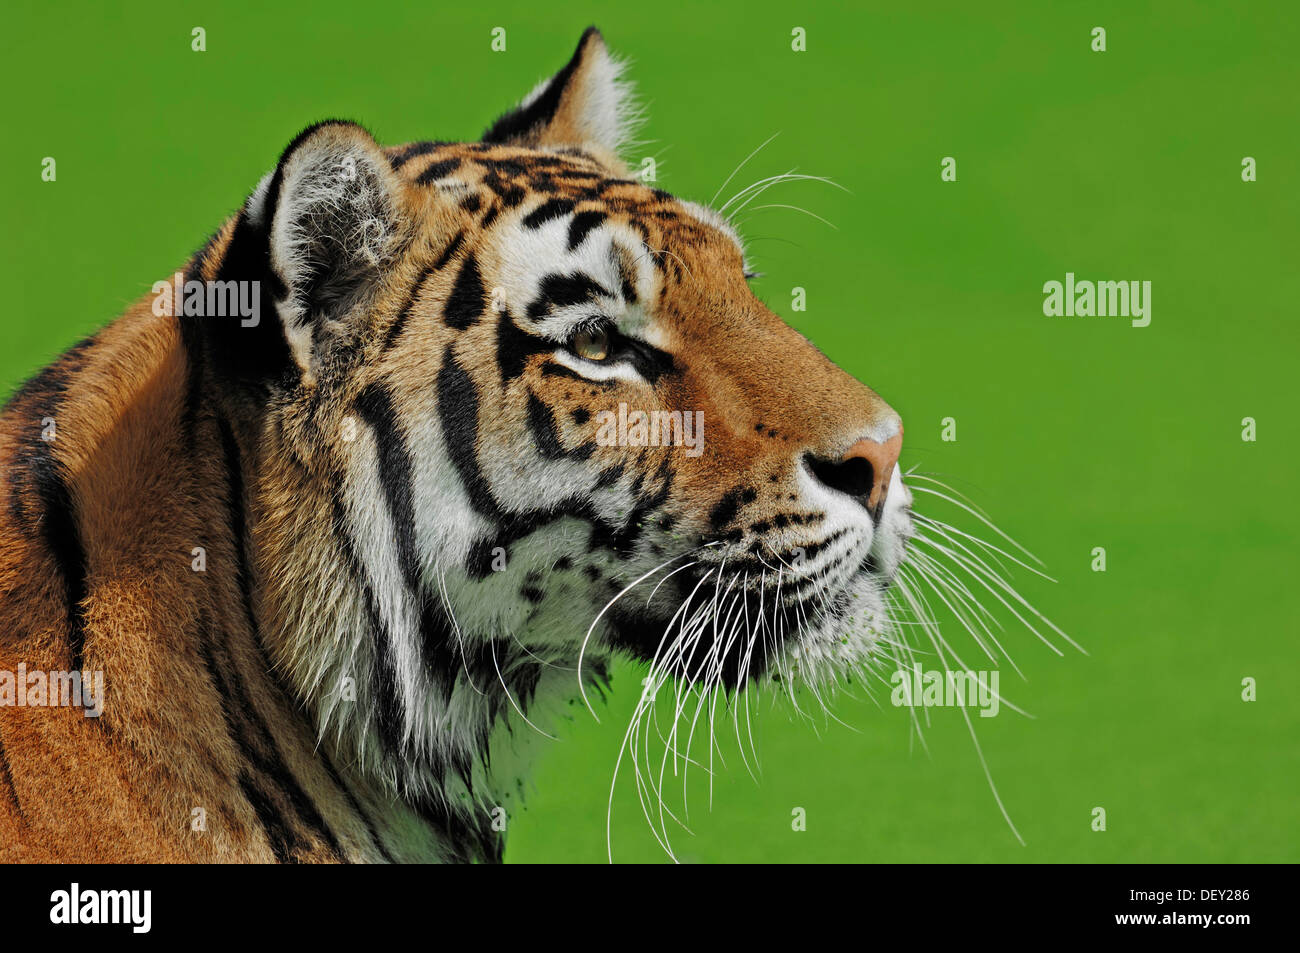 Siberian Tiger or Amur tiger (Panthera tigris altaica), native to Asia, in captivity, Netherlands, Europe Stock Photo